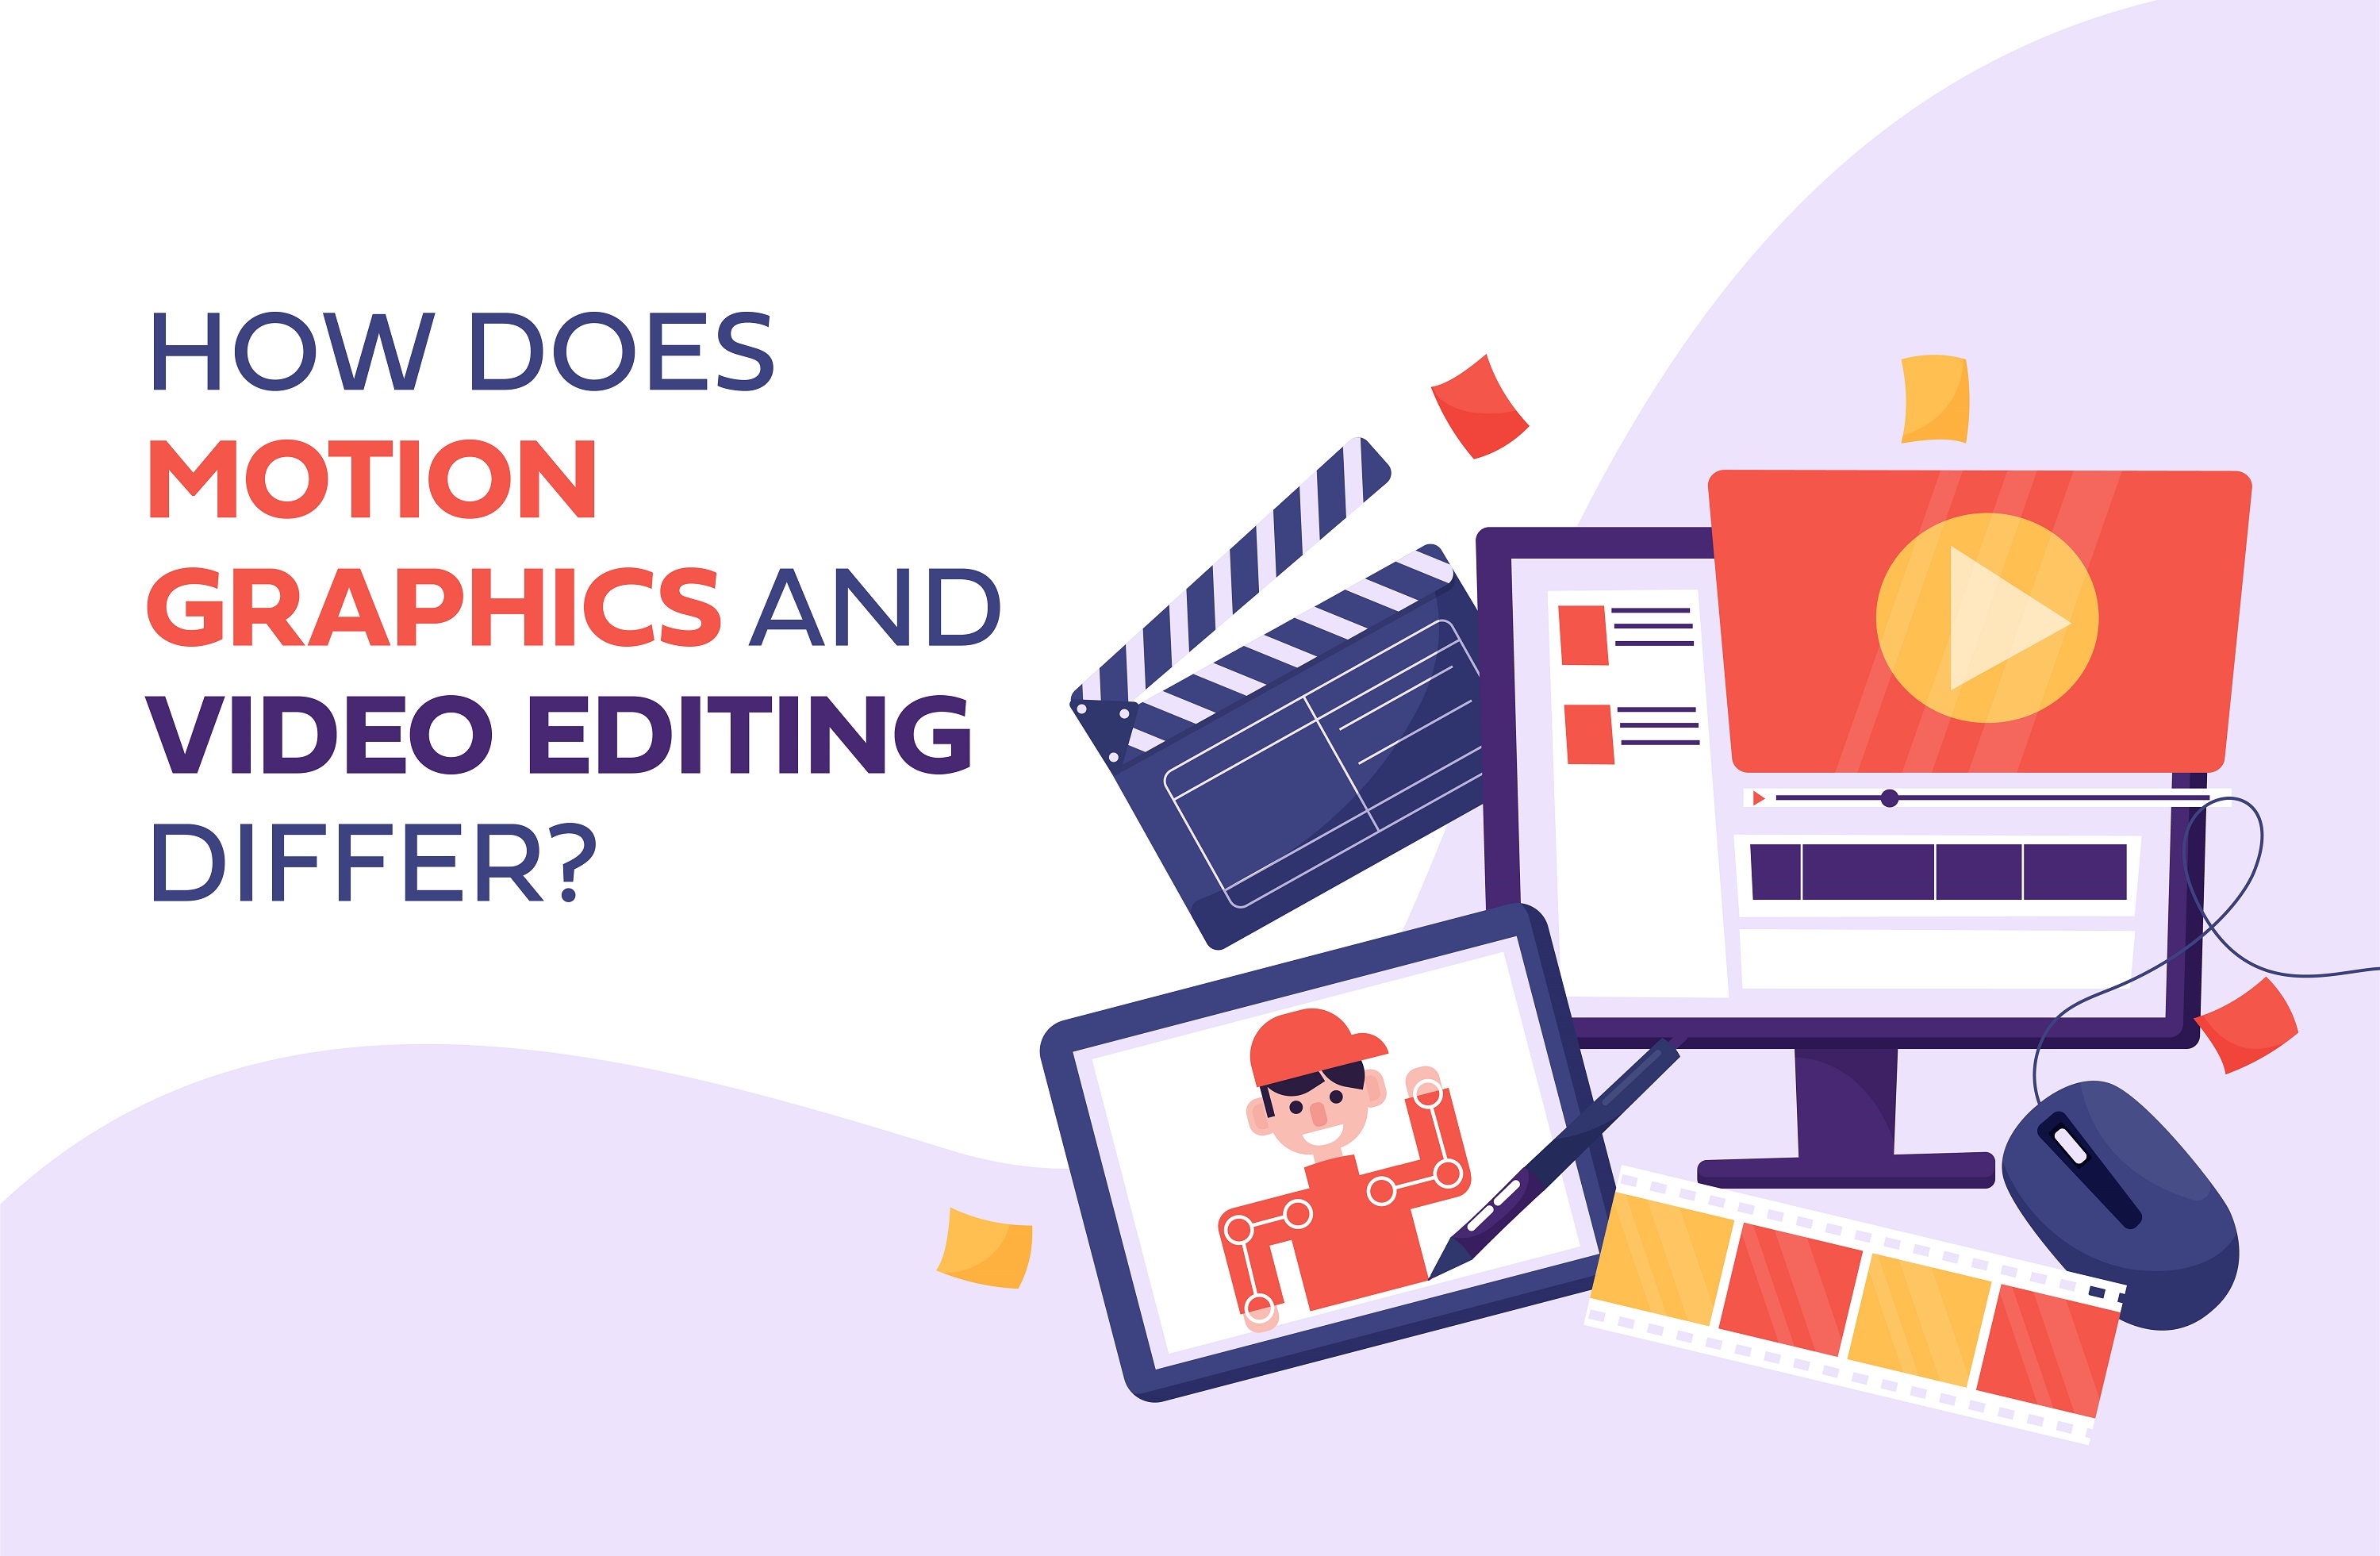 Motion Graphics And Video Editing- What’s the difference?